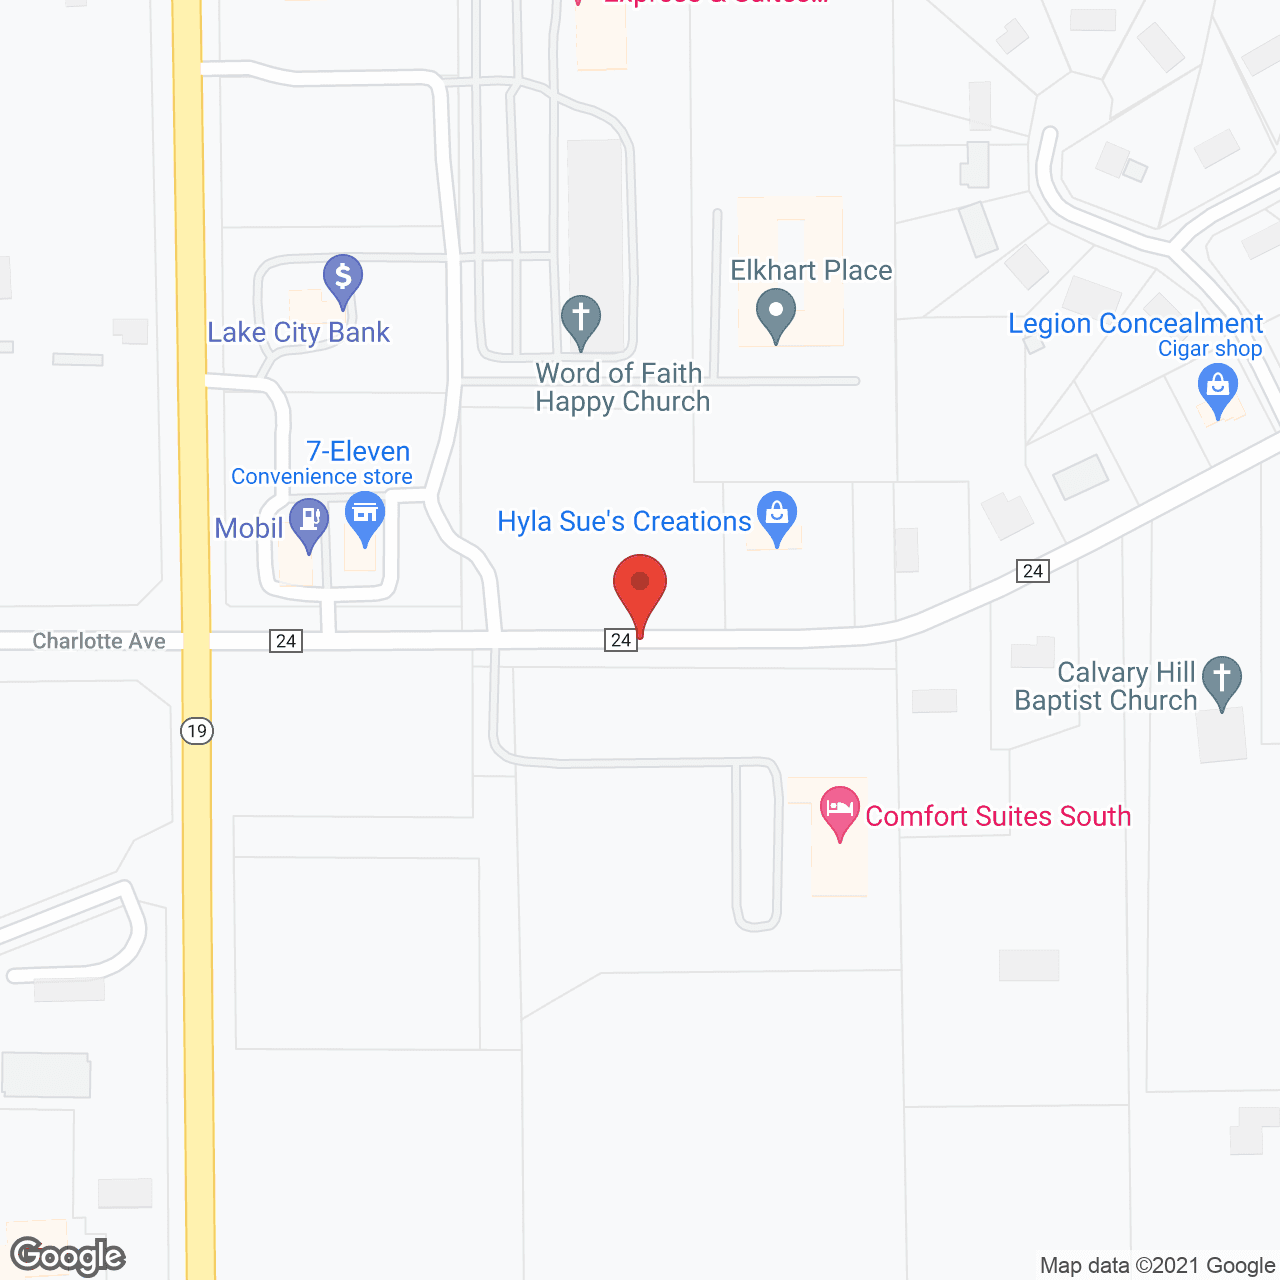 Elkhart Place in google map